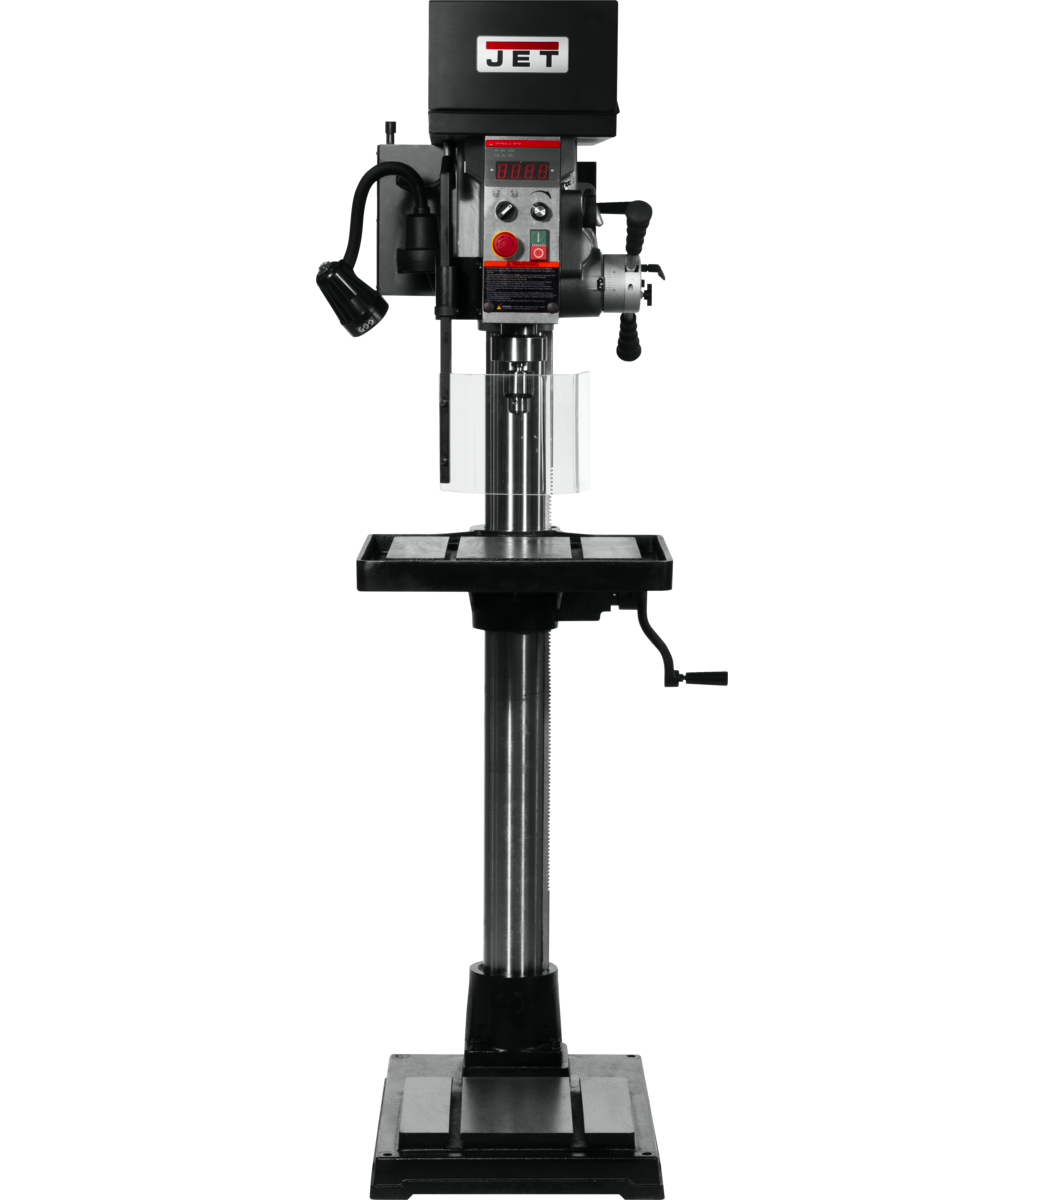 JET JDPE-20EVSC-PDF 1-1/4" Drilling Capacity, 2HP, 115V, 1Ph Electronic Variable Speed Drill w/ Clutch Speed Change system & Power Downfeed